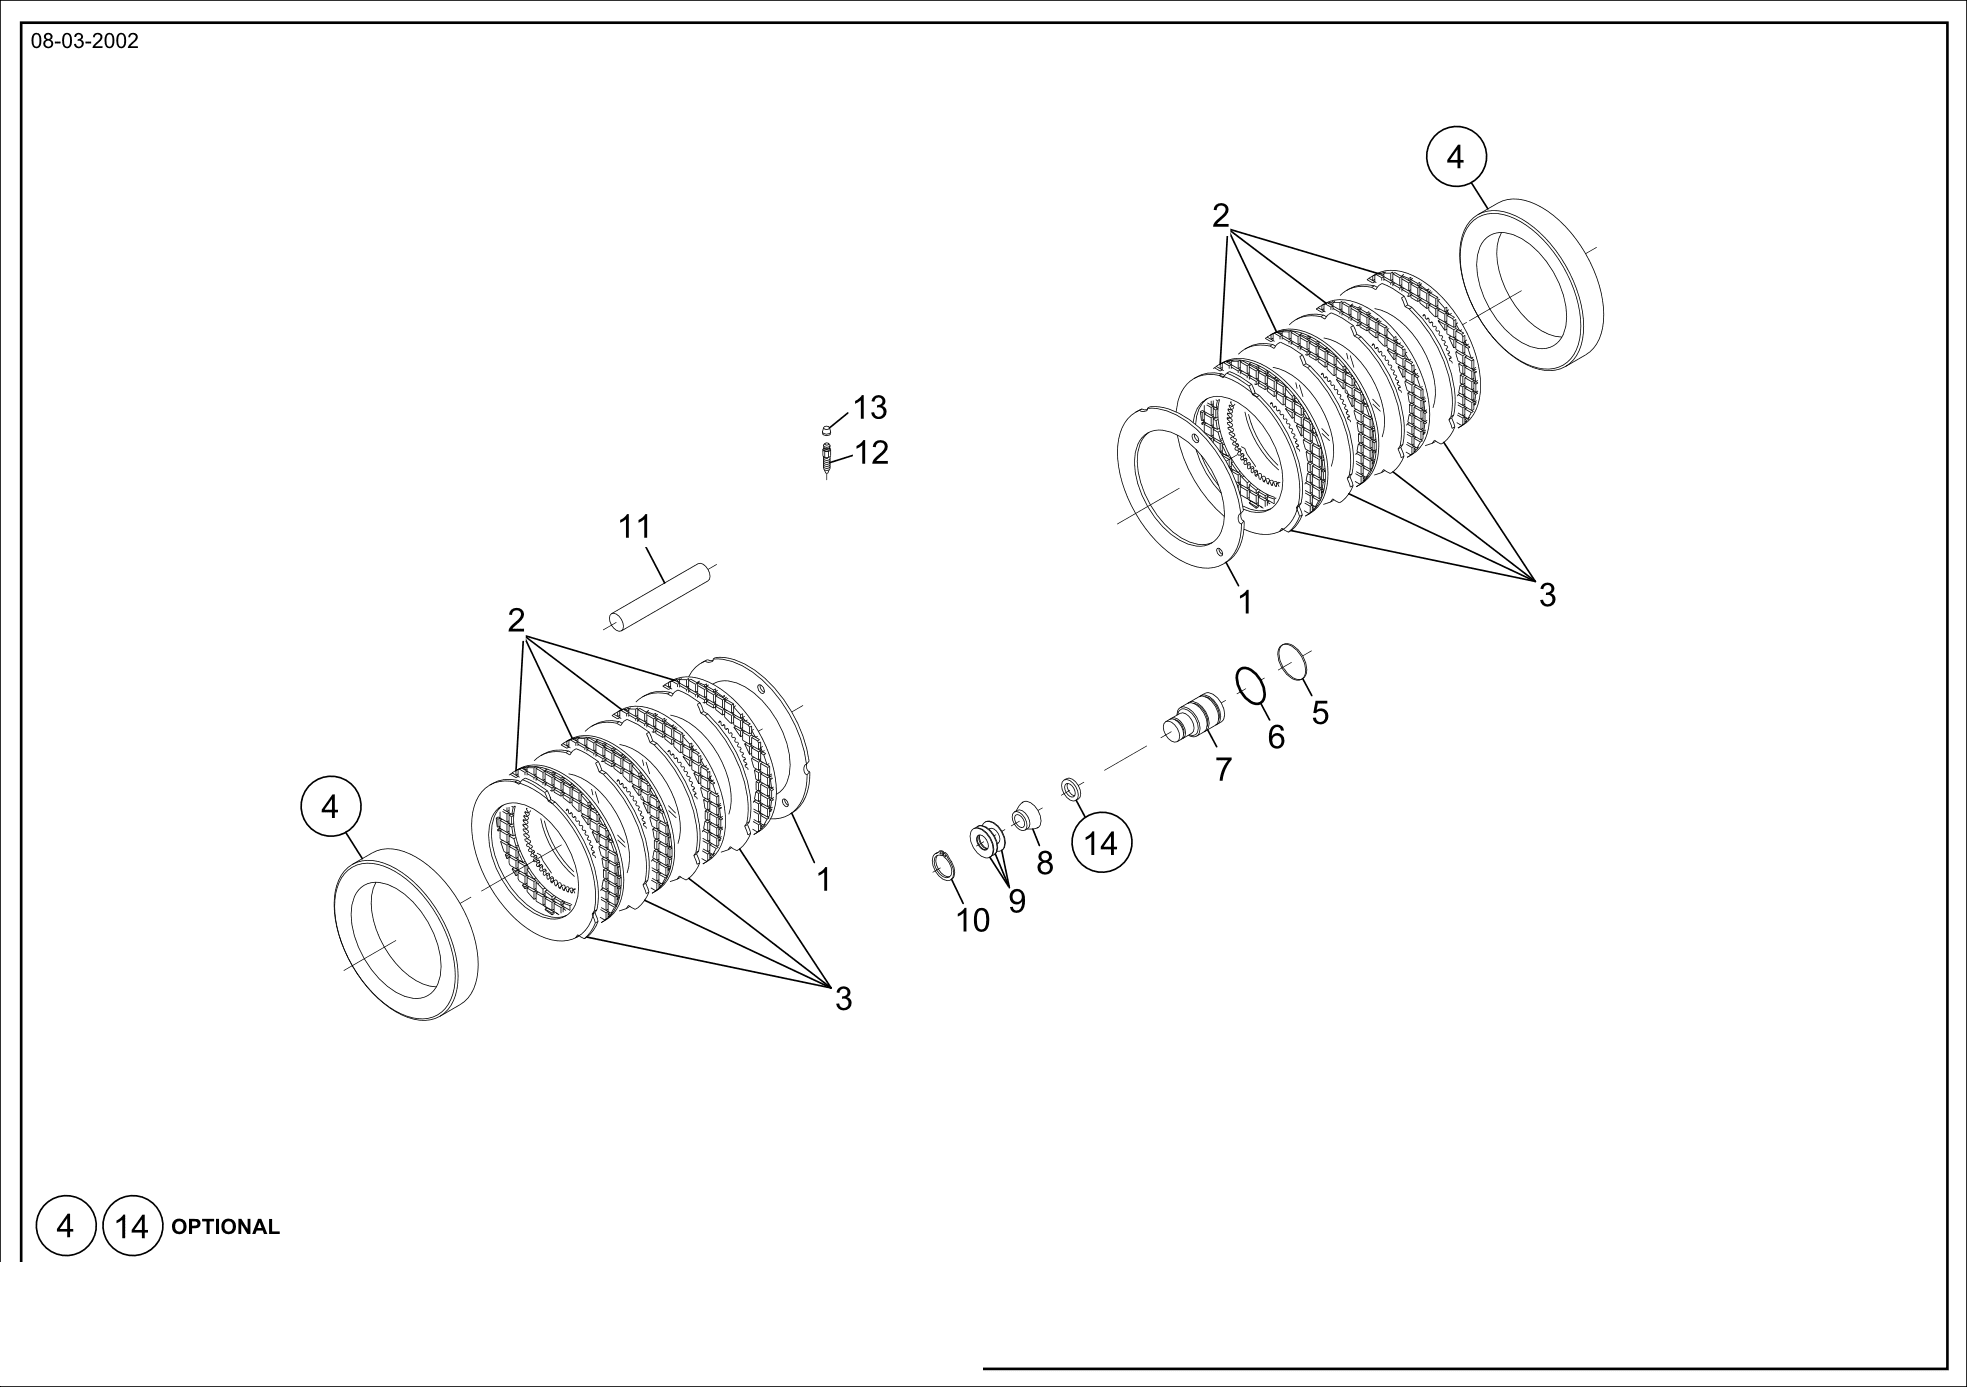 drawing for BRODERSON MANUFACTURING 055-00011 - CUP SPRING (figure 4)